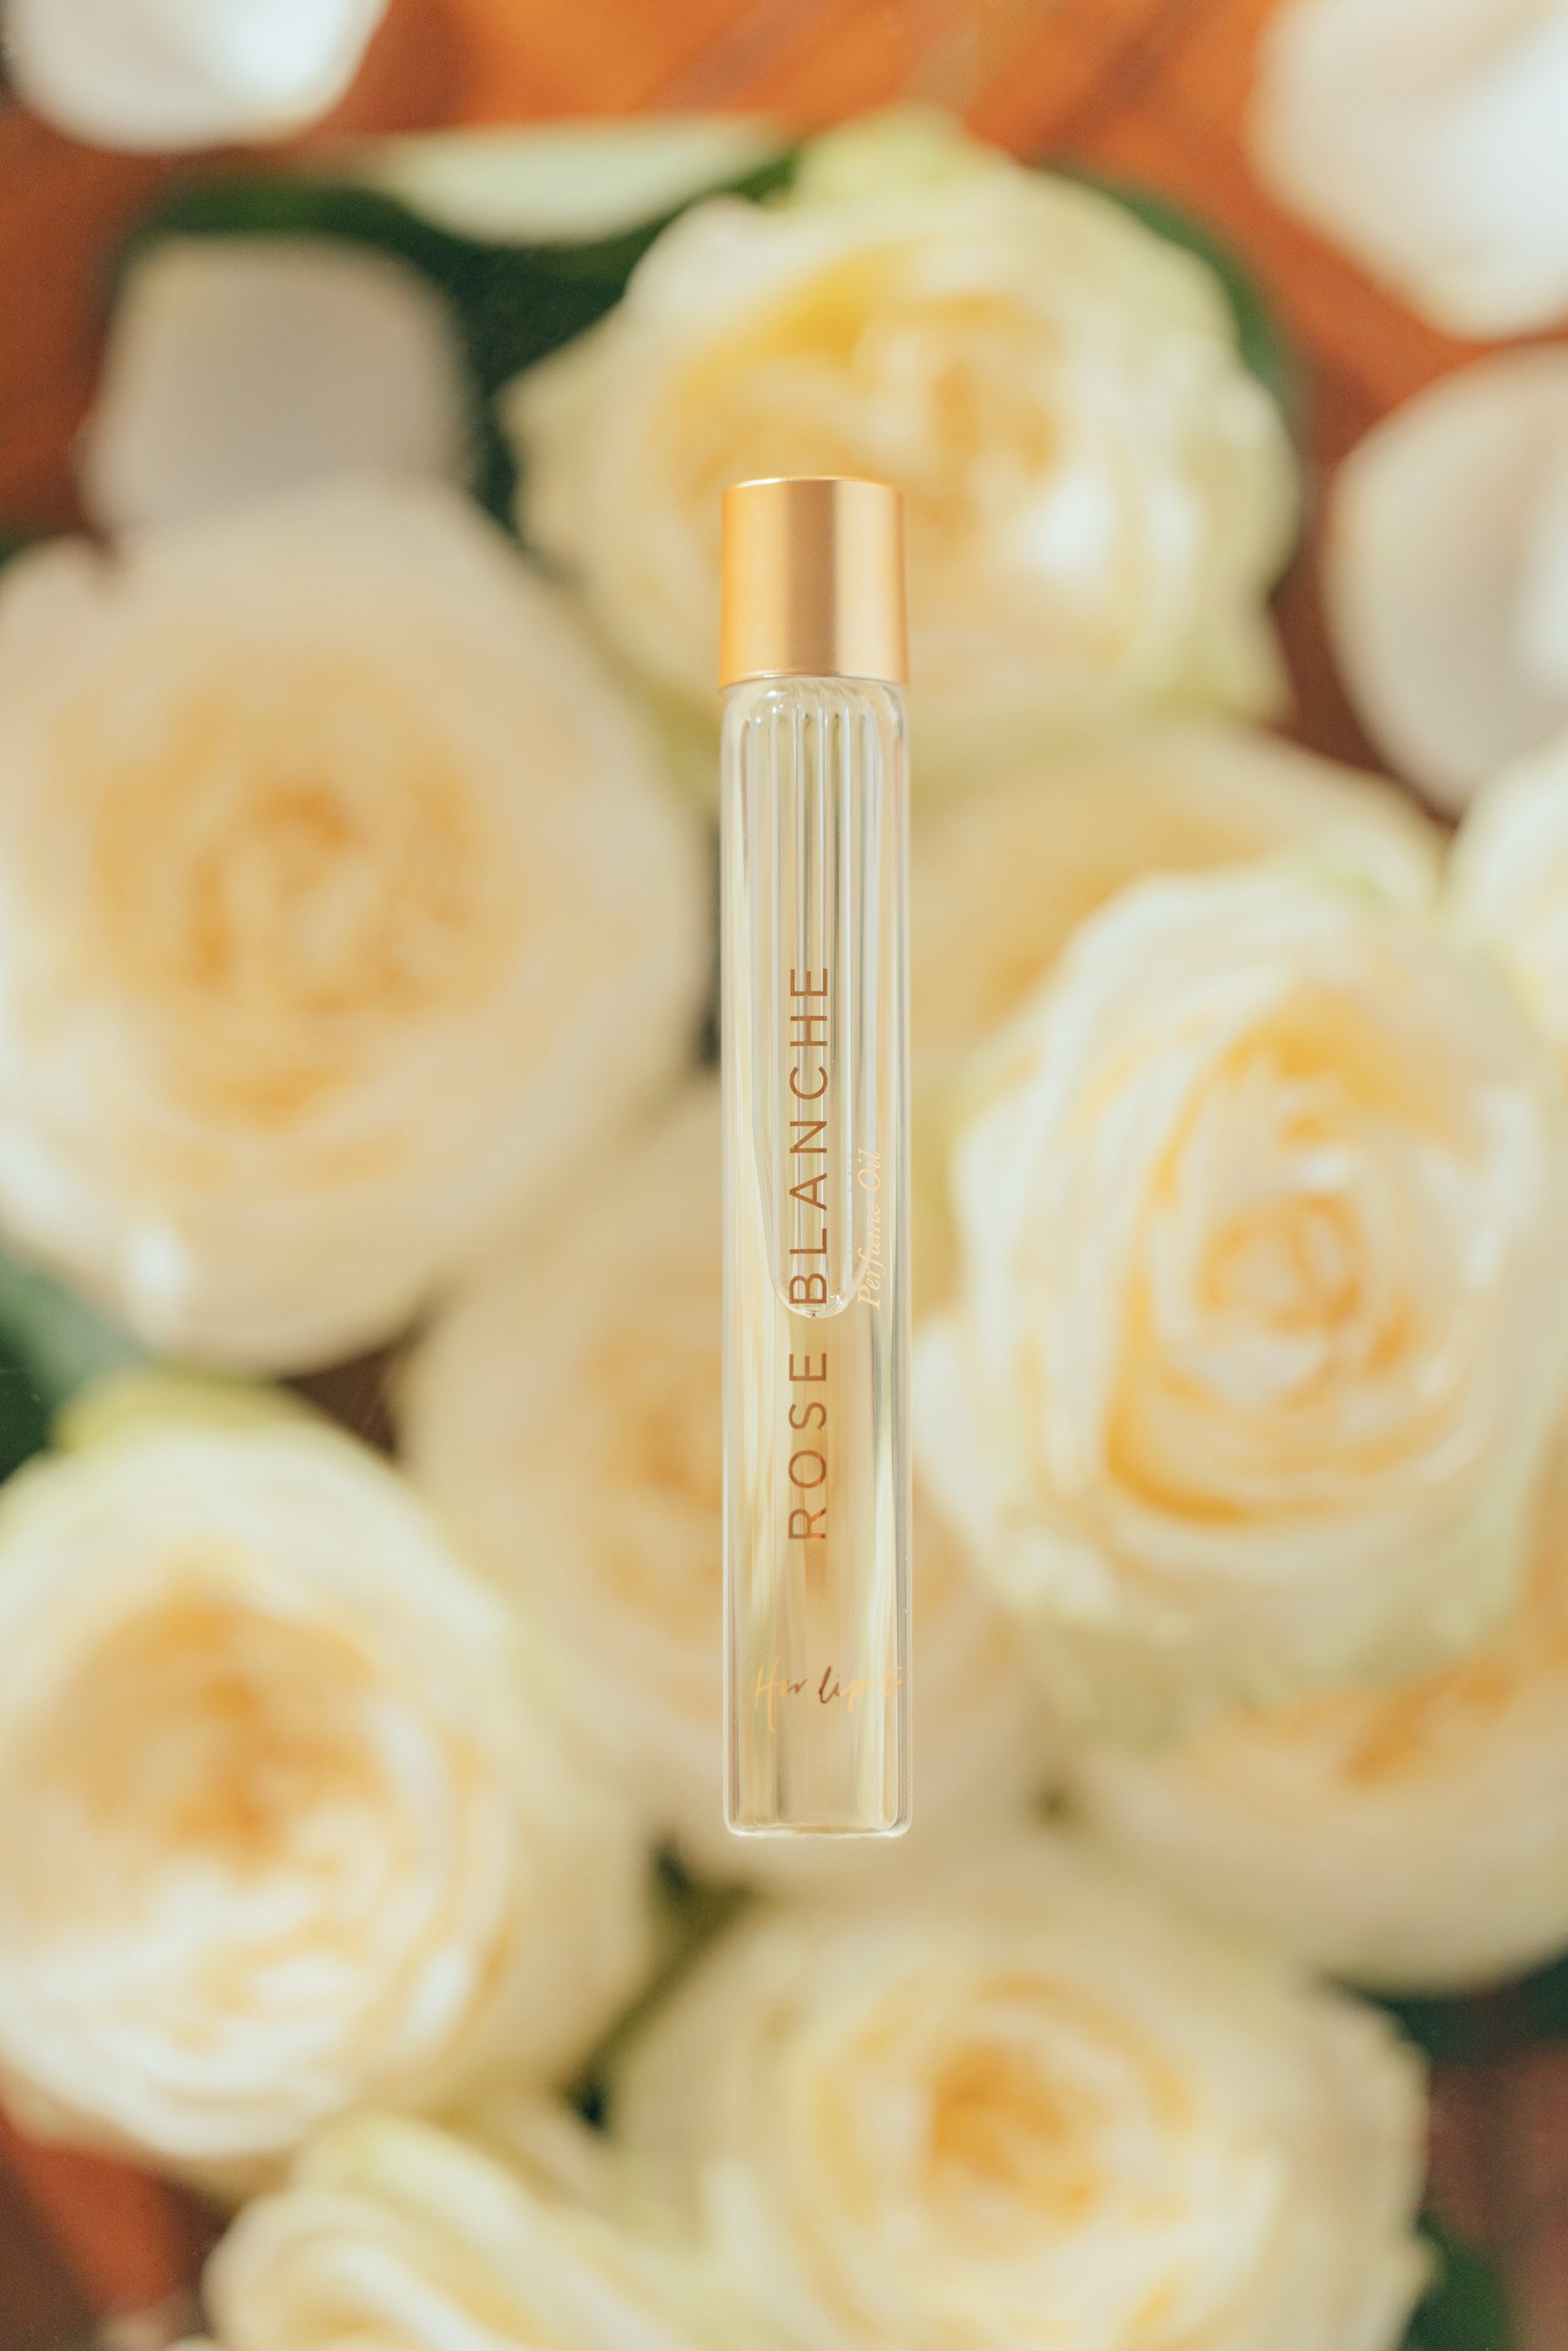 ROSE BLANCHE Perfume Oil